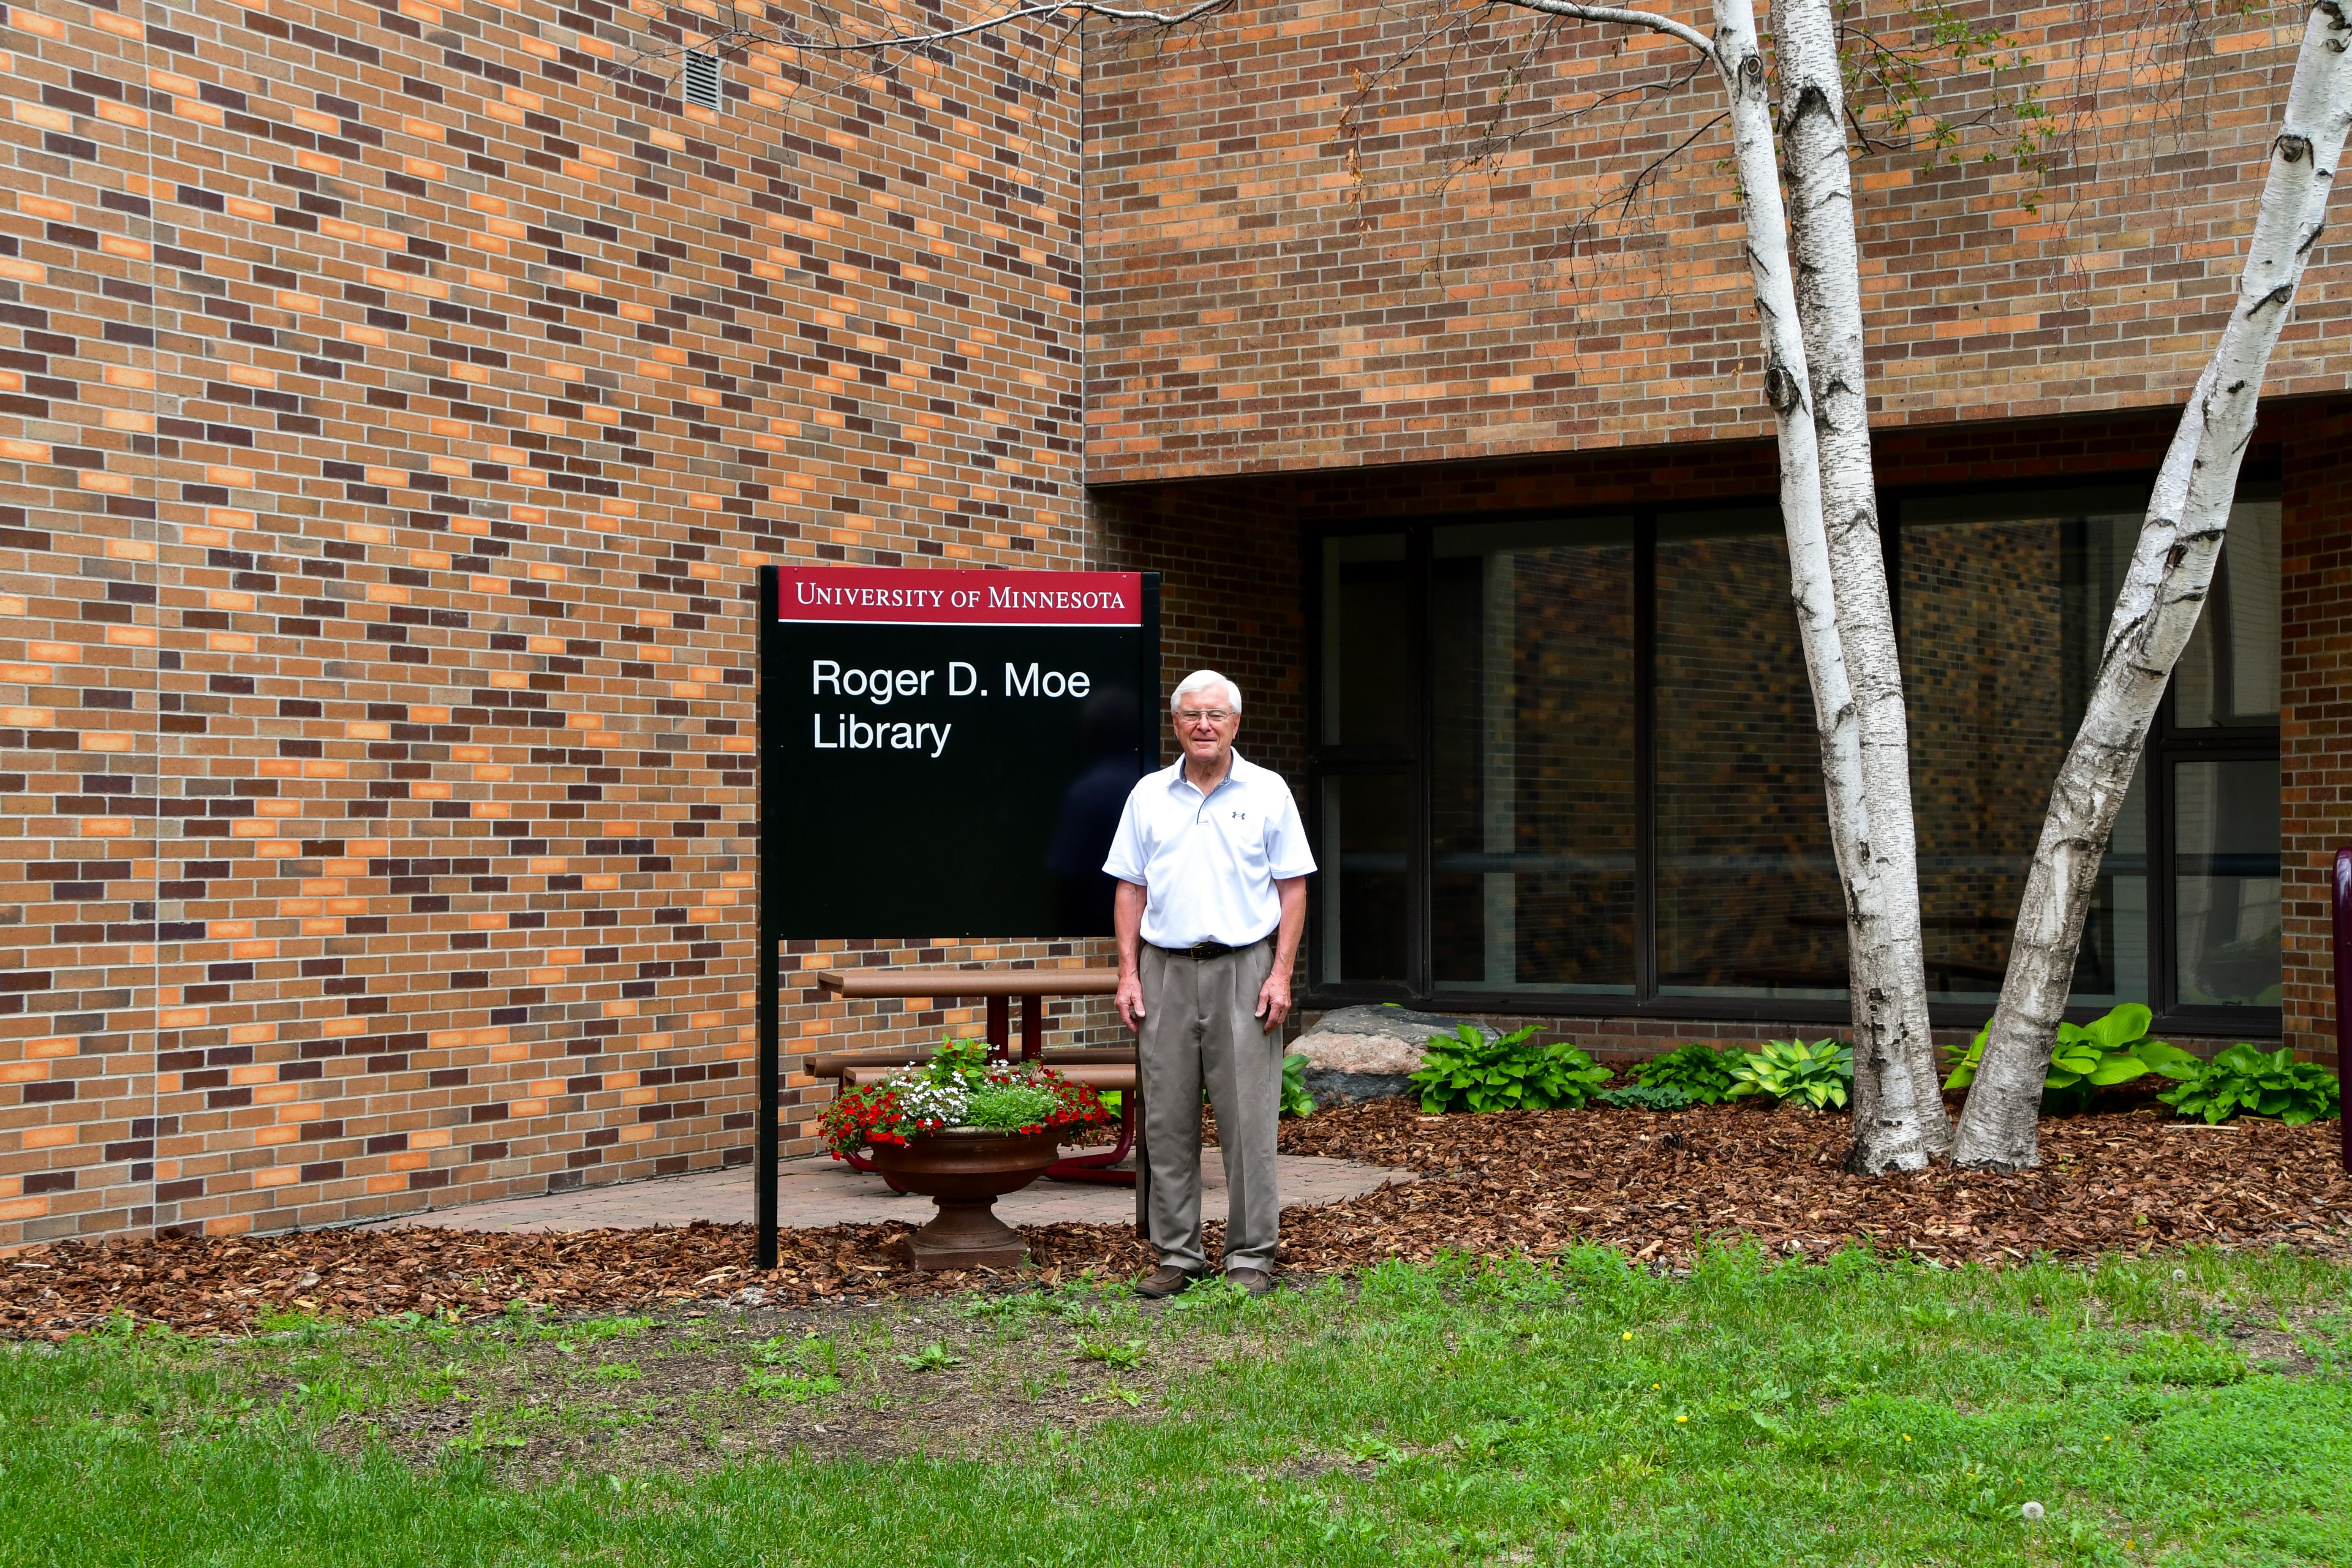 Roger D. Moe stands in front of the sign for the Roger D. Moe Library